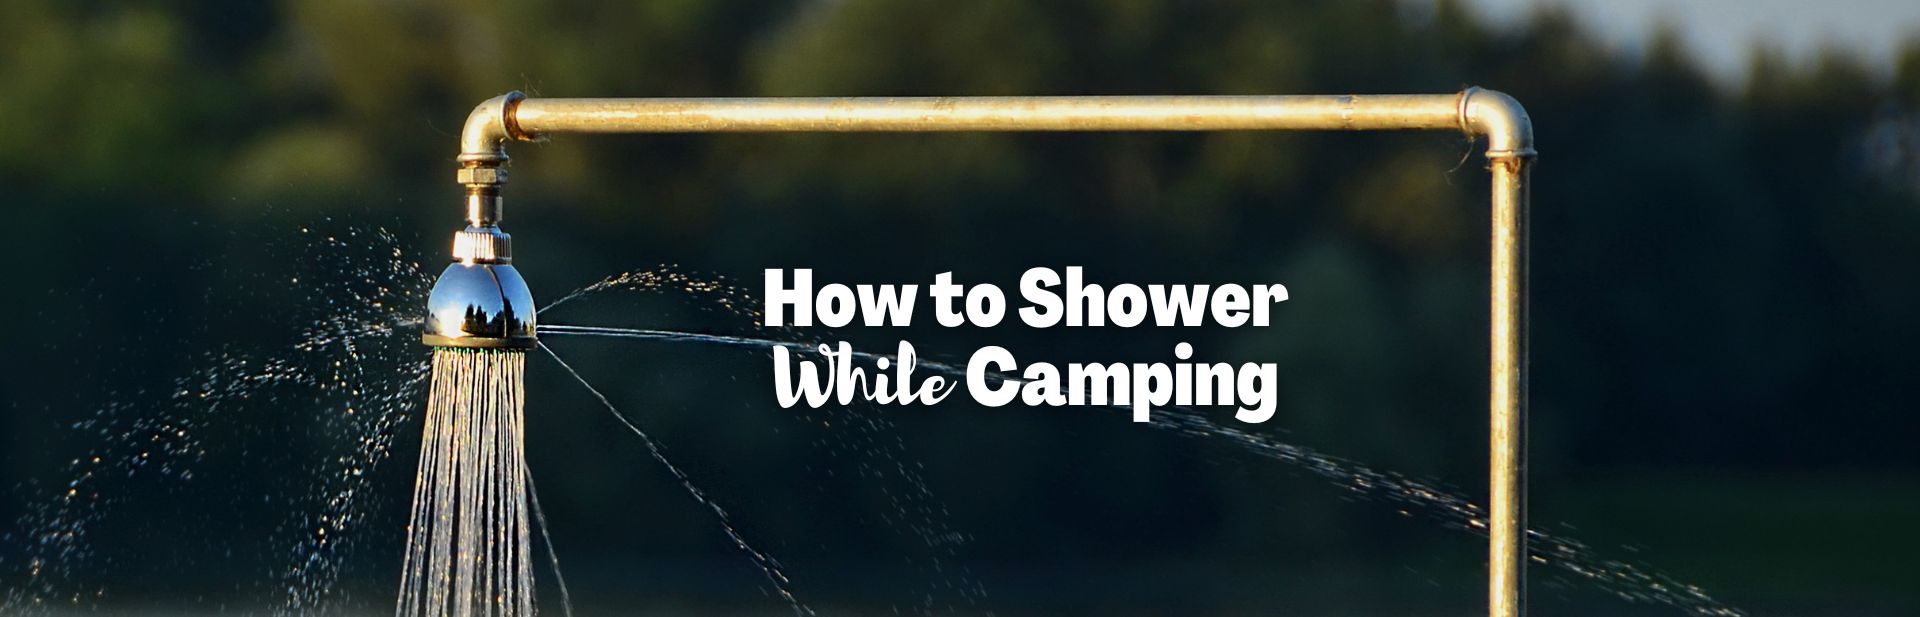 Cleanliness On The Go: How To Shower While Camping